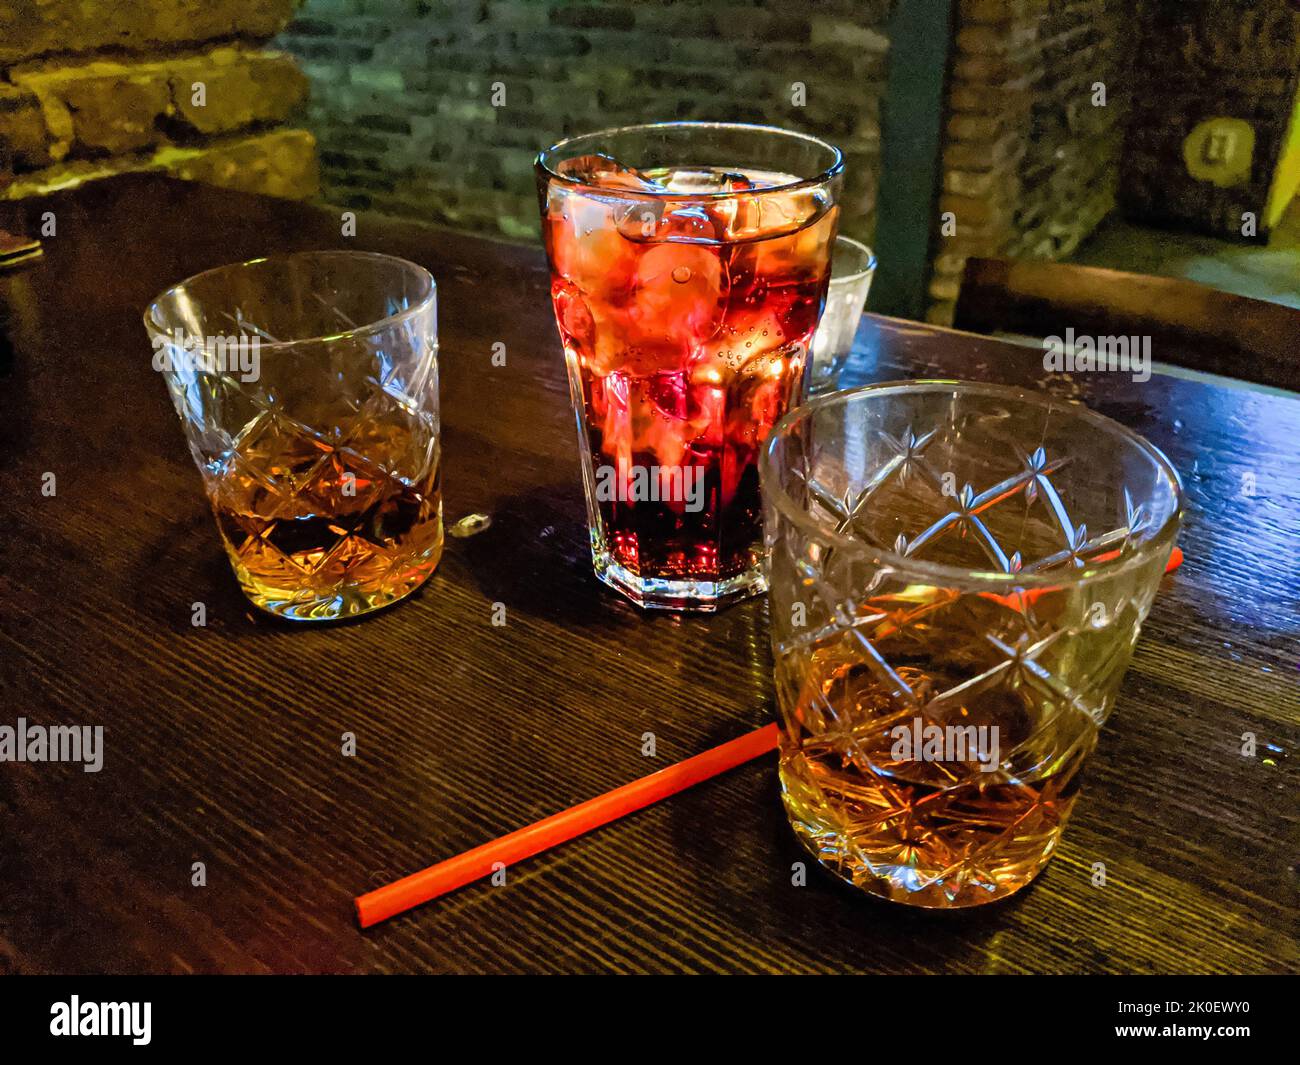 Two cut crystal glasses with rum, along with a glass containing cola on the table of a bar Stock Photo